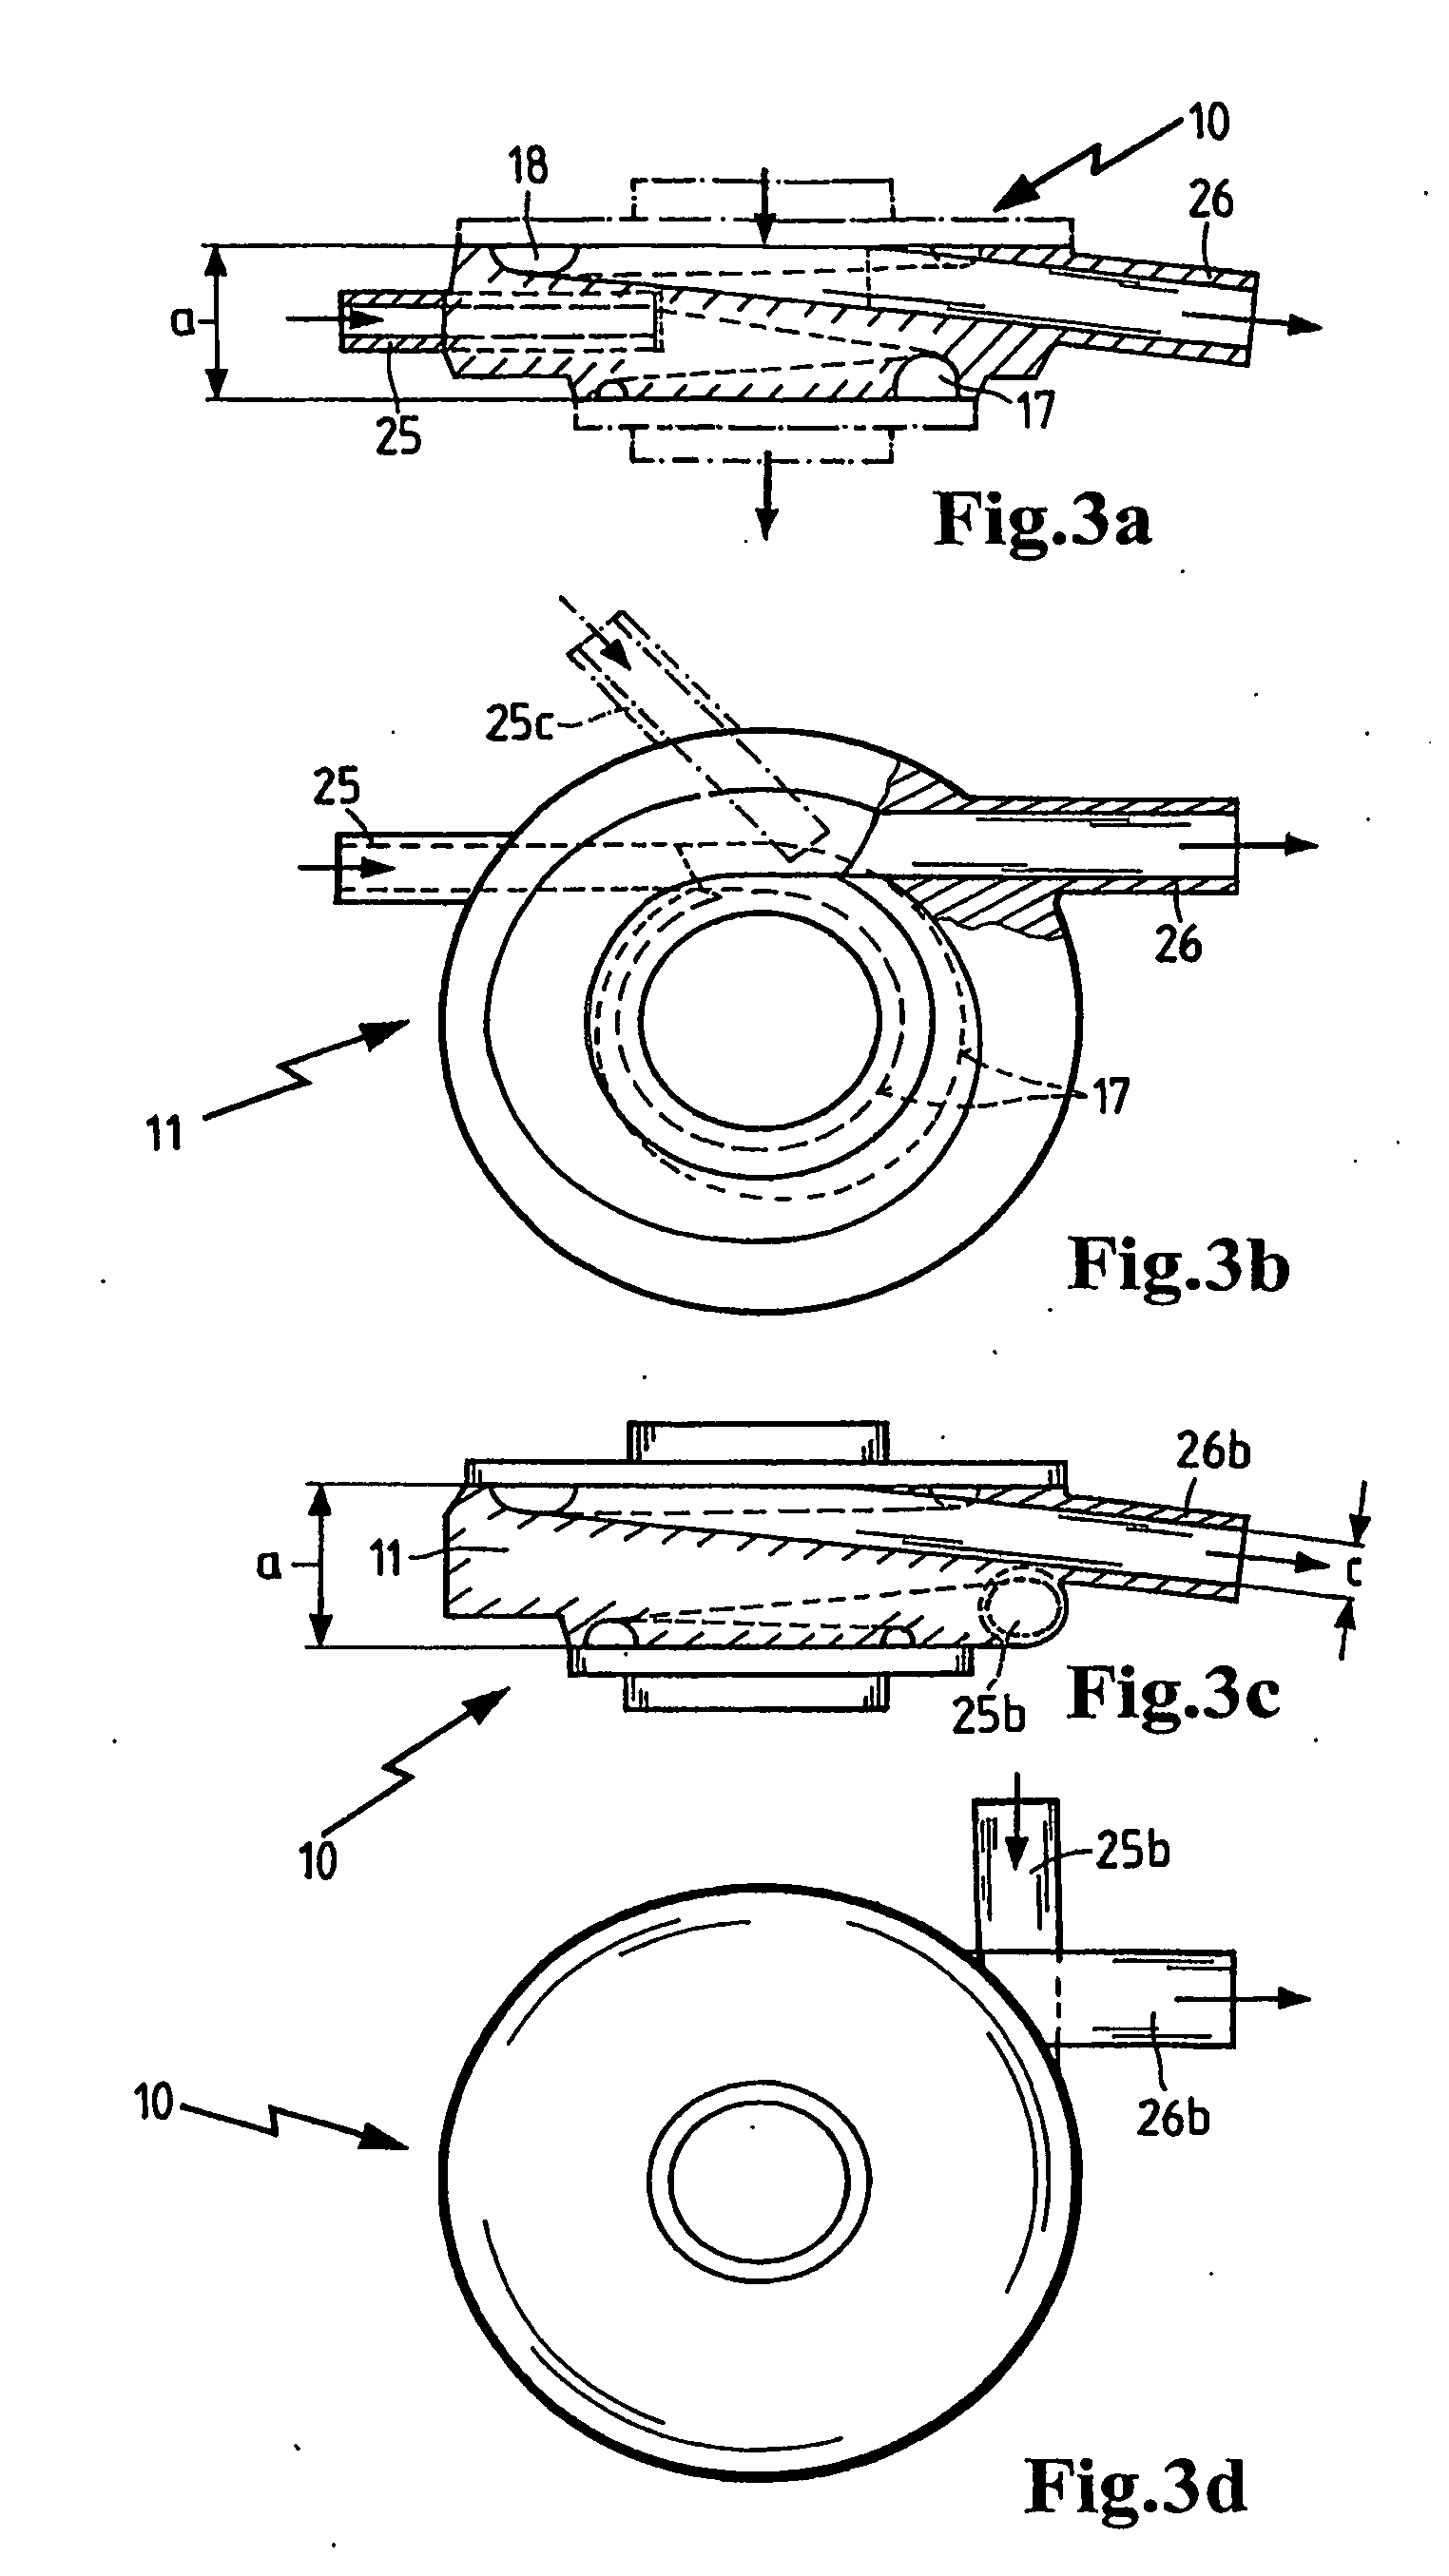 Non-Positive-Displacement Machine Comprising a Spiral Channel Provided in the Housing Middle Part